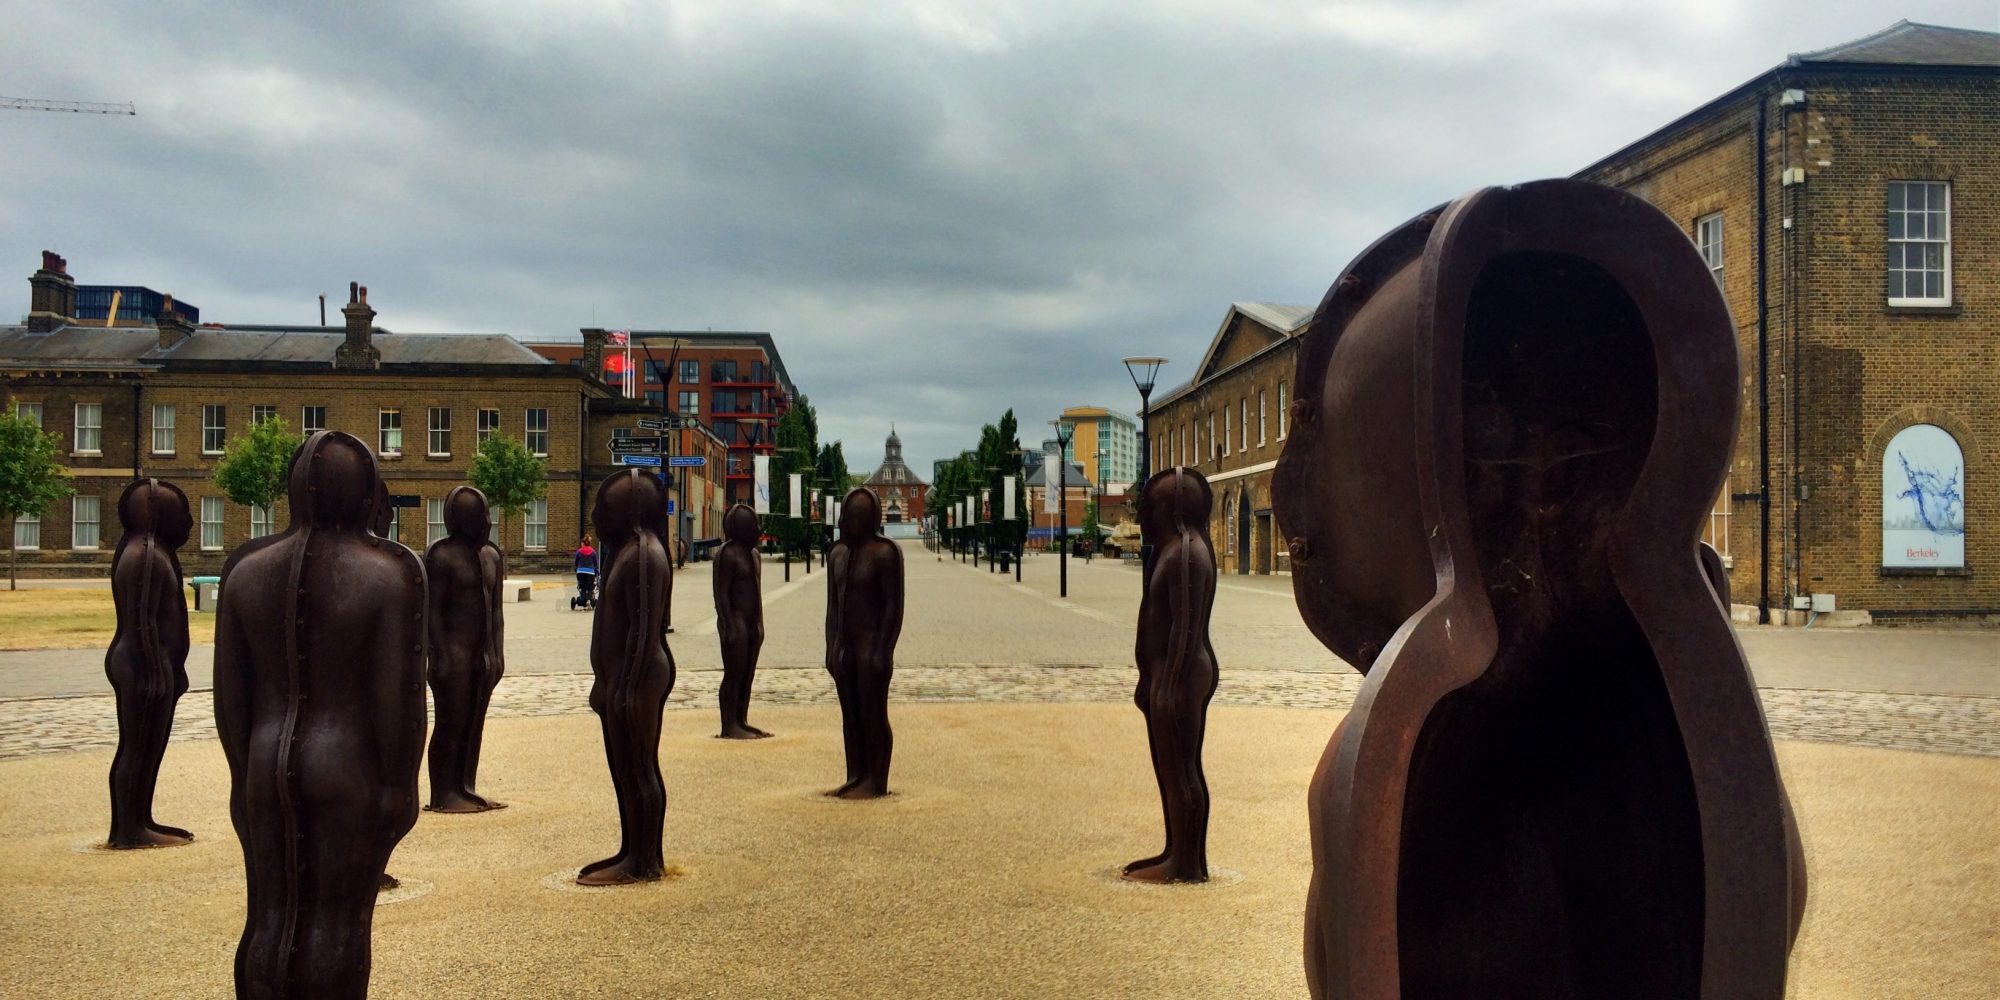 Eight figure shaped metal sculptures, stood on gravelled piazza with historic two storey buildings in background.